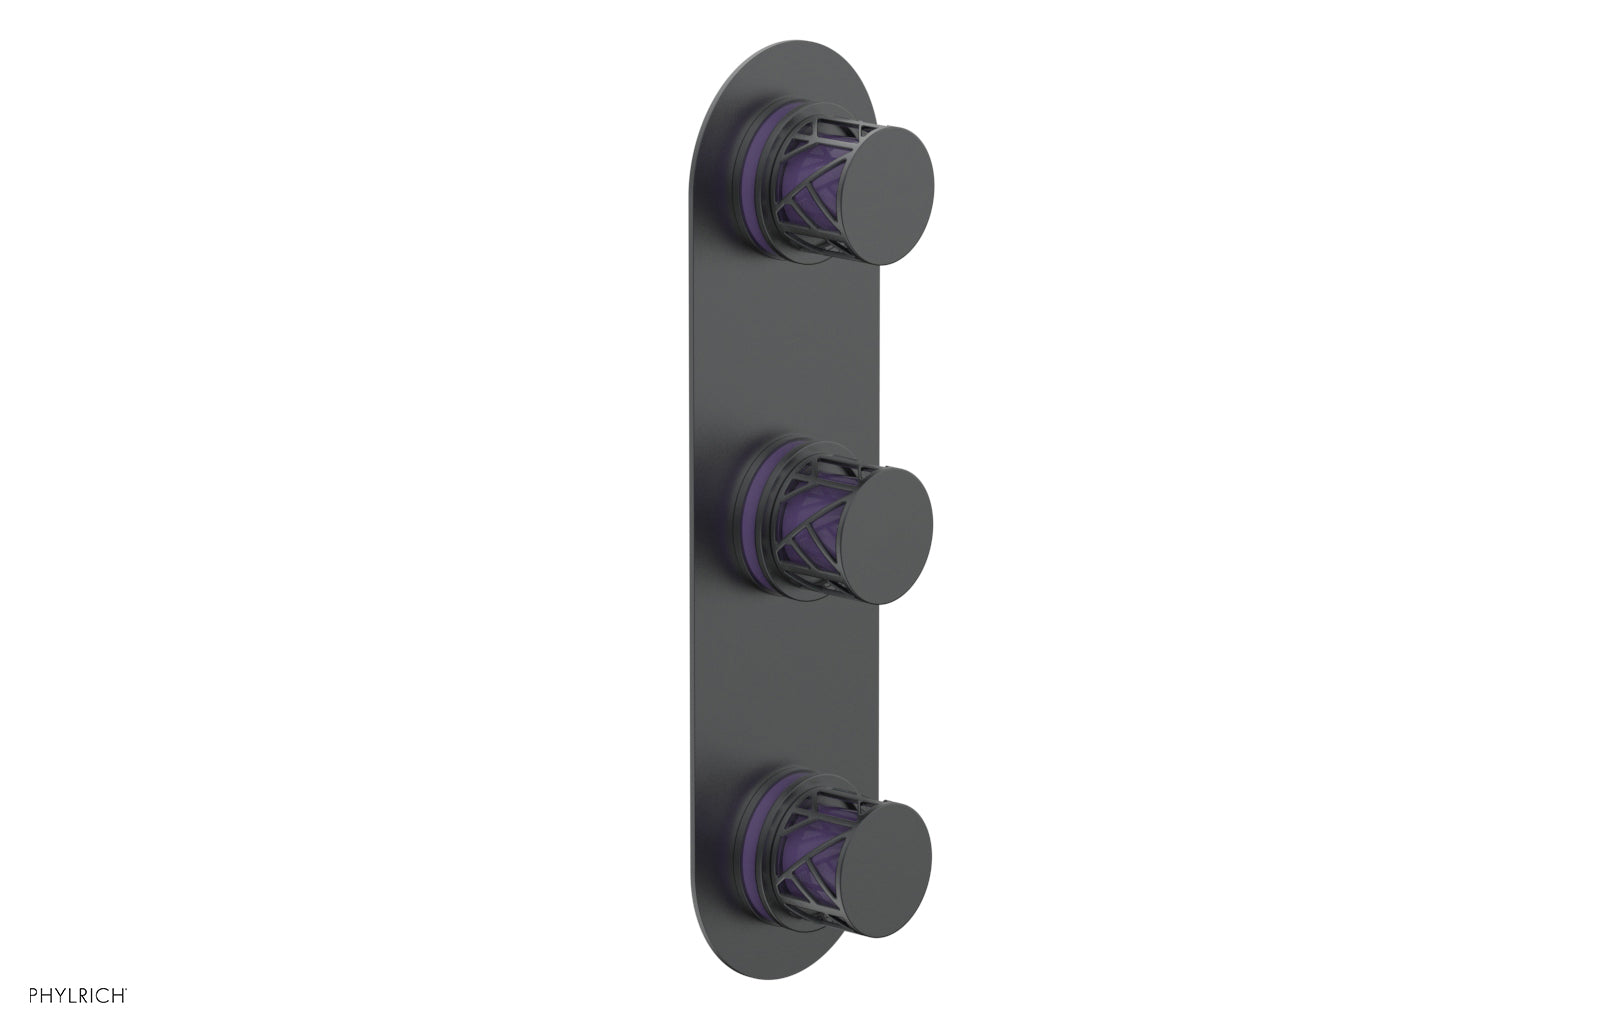 Phylrich JOLIE Thermostatic Valve with Two Volume Control with "Purple" Accents